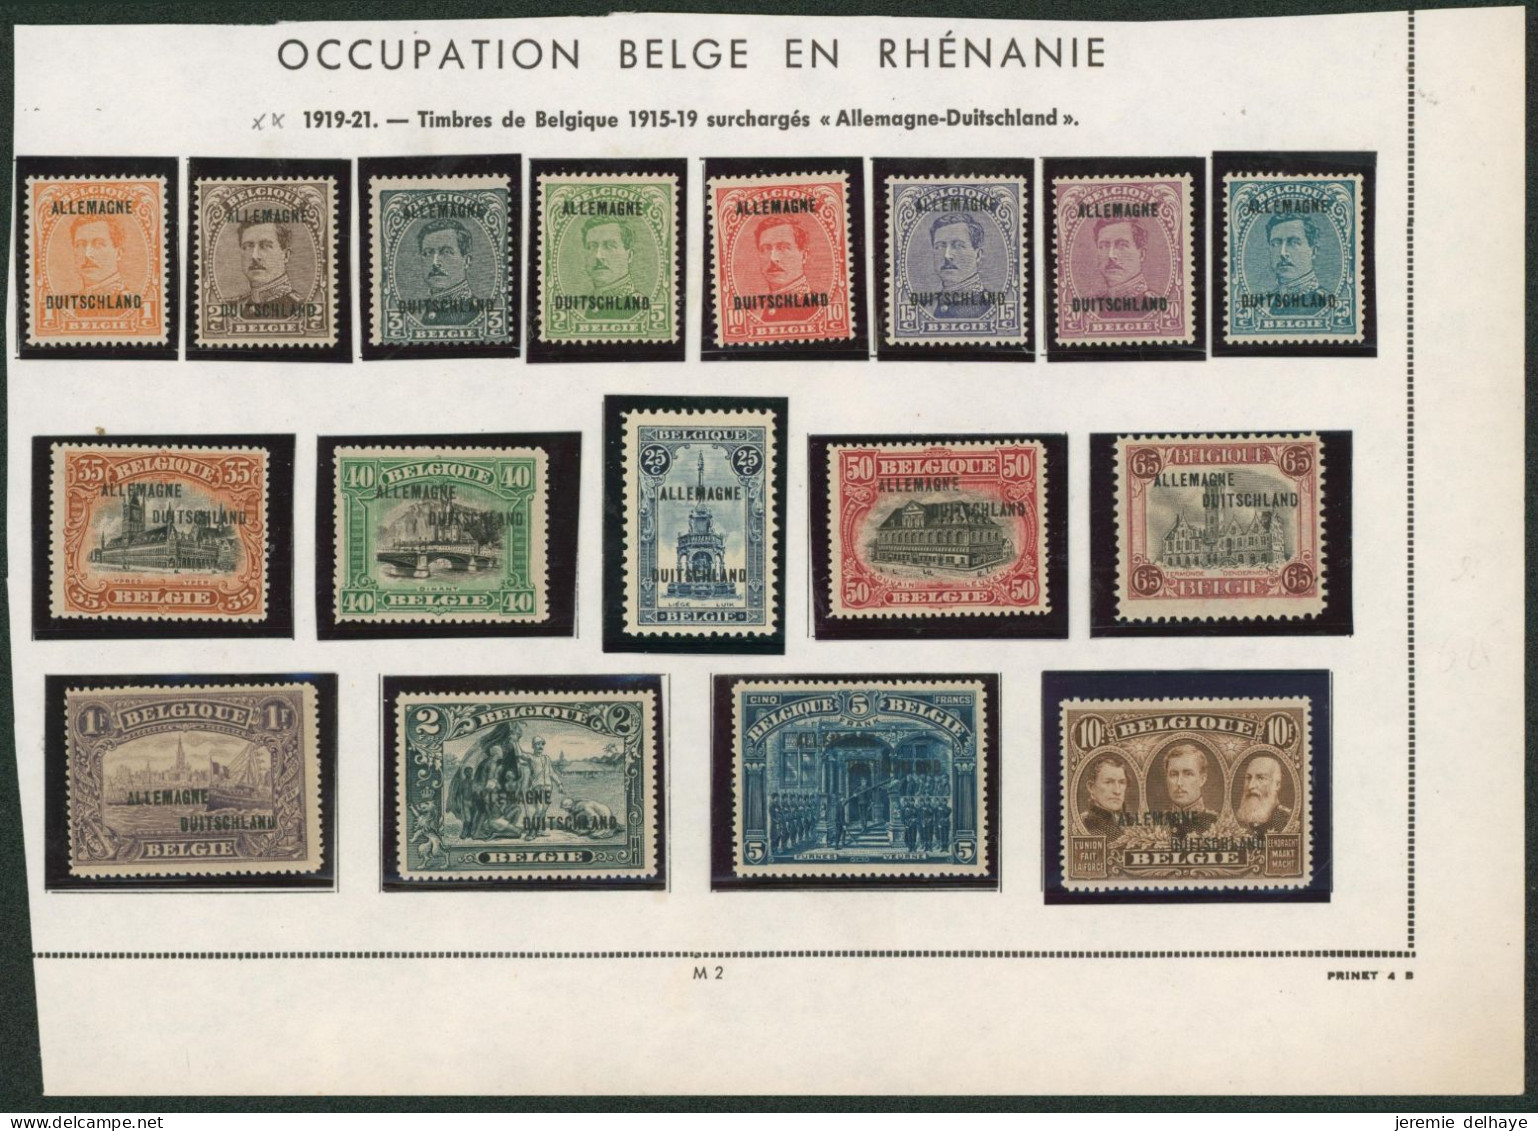 Guerre 14-18 - ALLEMAGNE - DUITSCHLAND OC38/54** Série Complète Neuf Sans Charnières (MNH) - OC38/54 Occupazione Belga In Germania